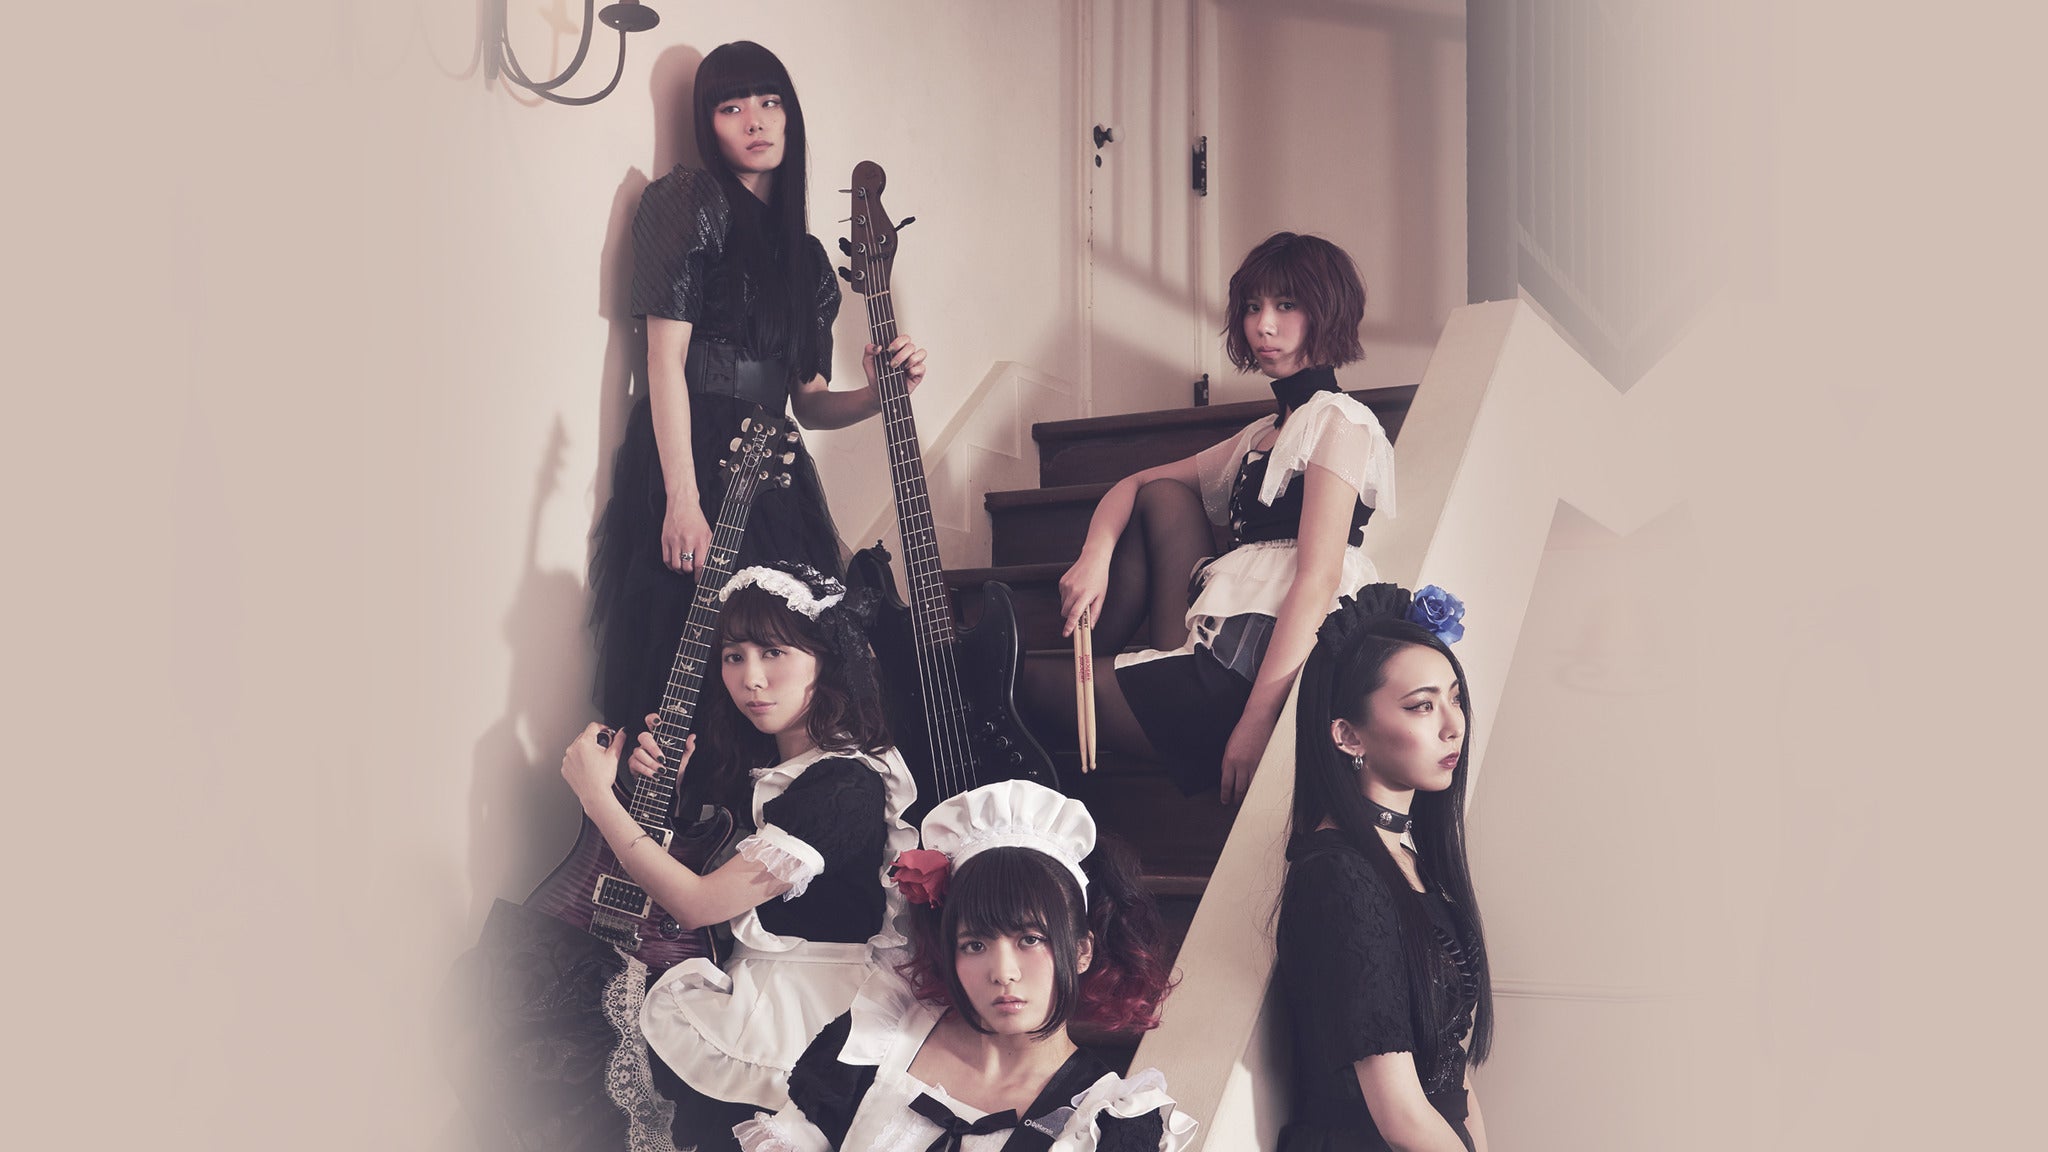 BAND-MAID WORLD DOMINATION TOUR 2019 ~gekidou~ in New York promo photo for Live Nation presale offer code